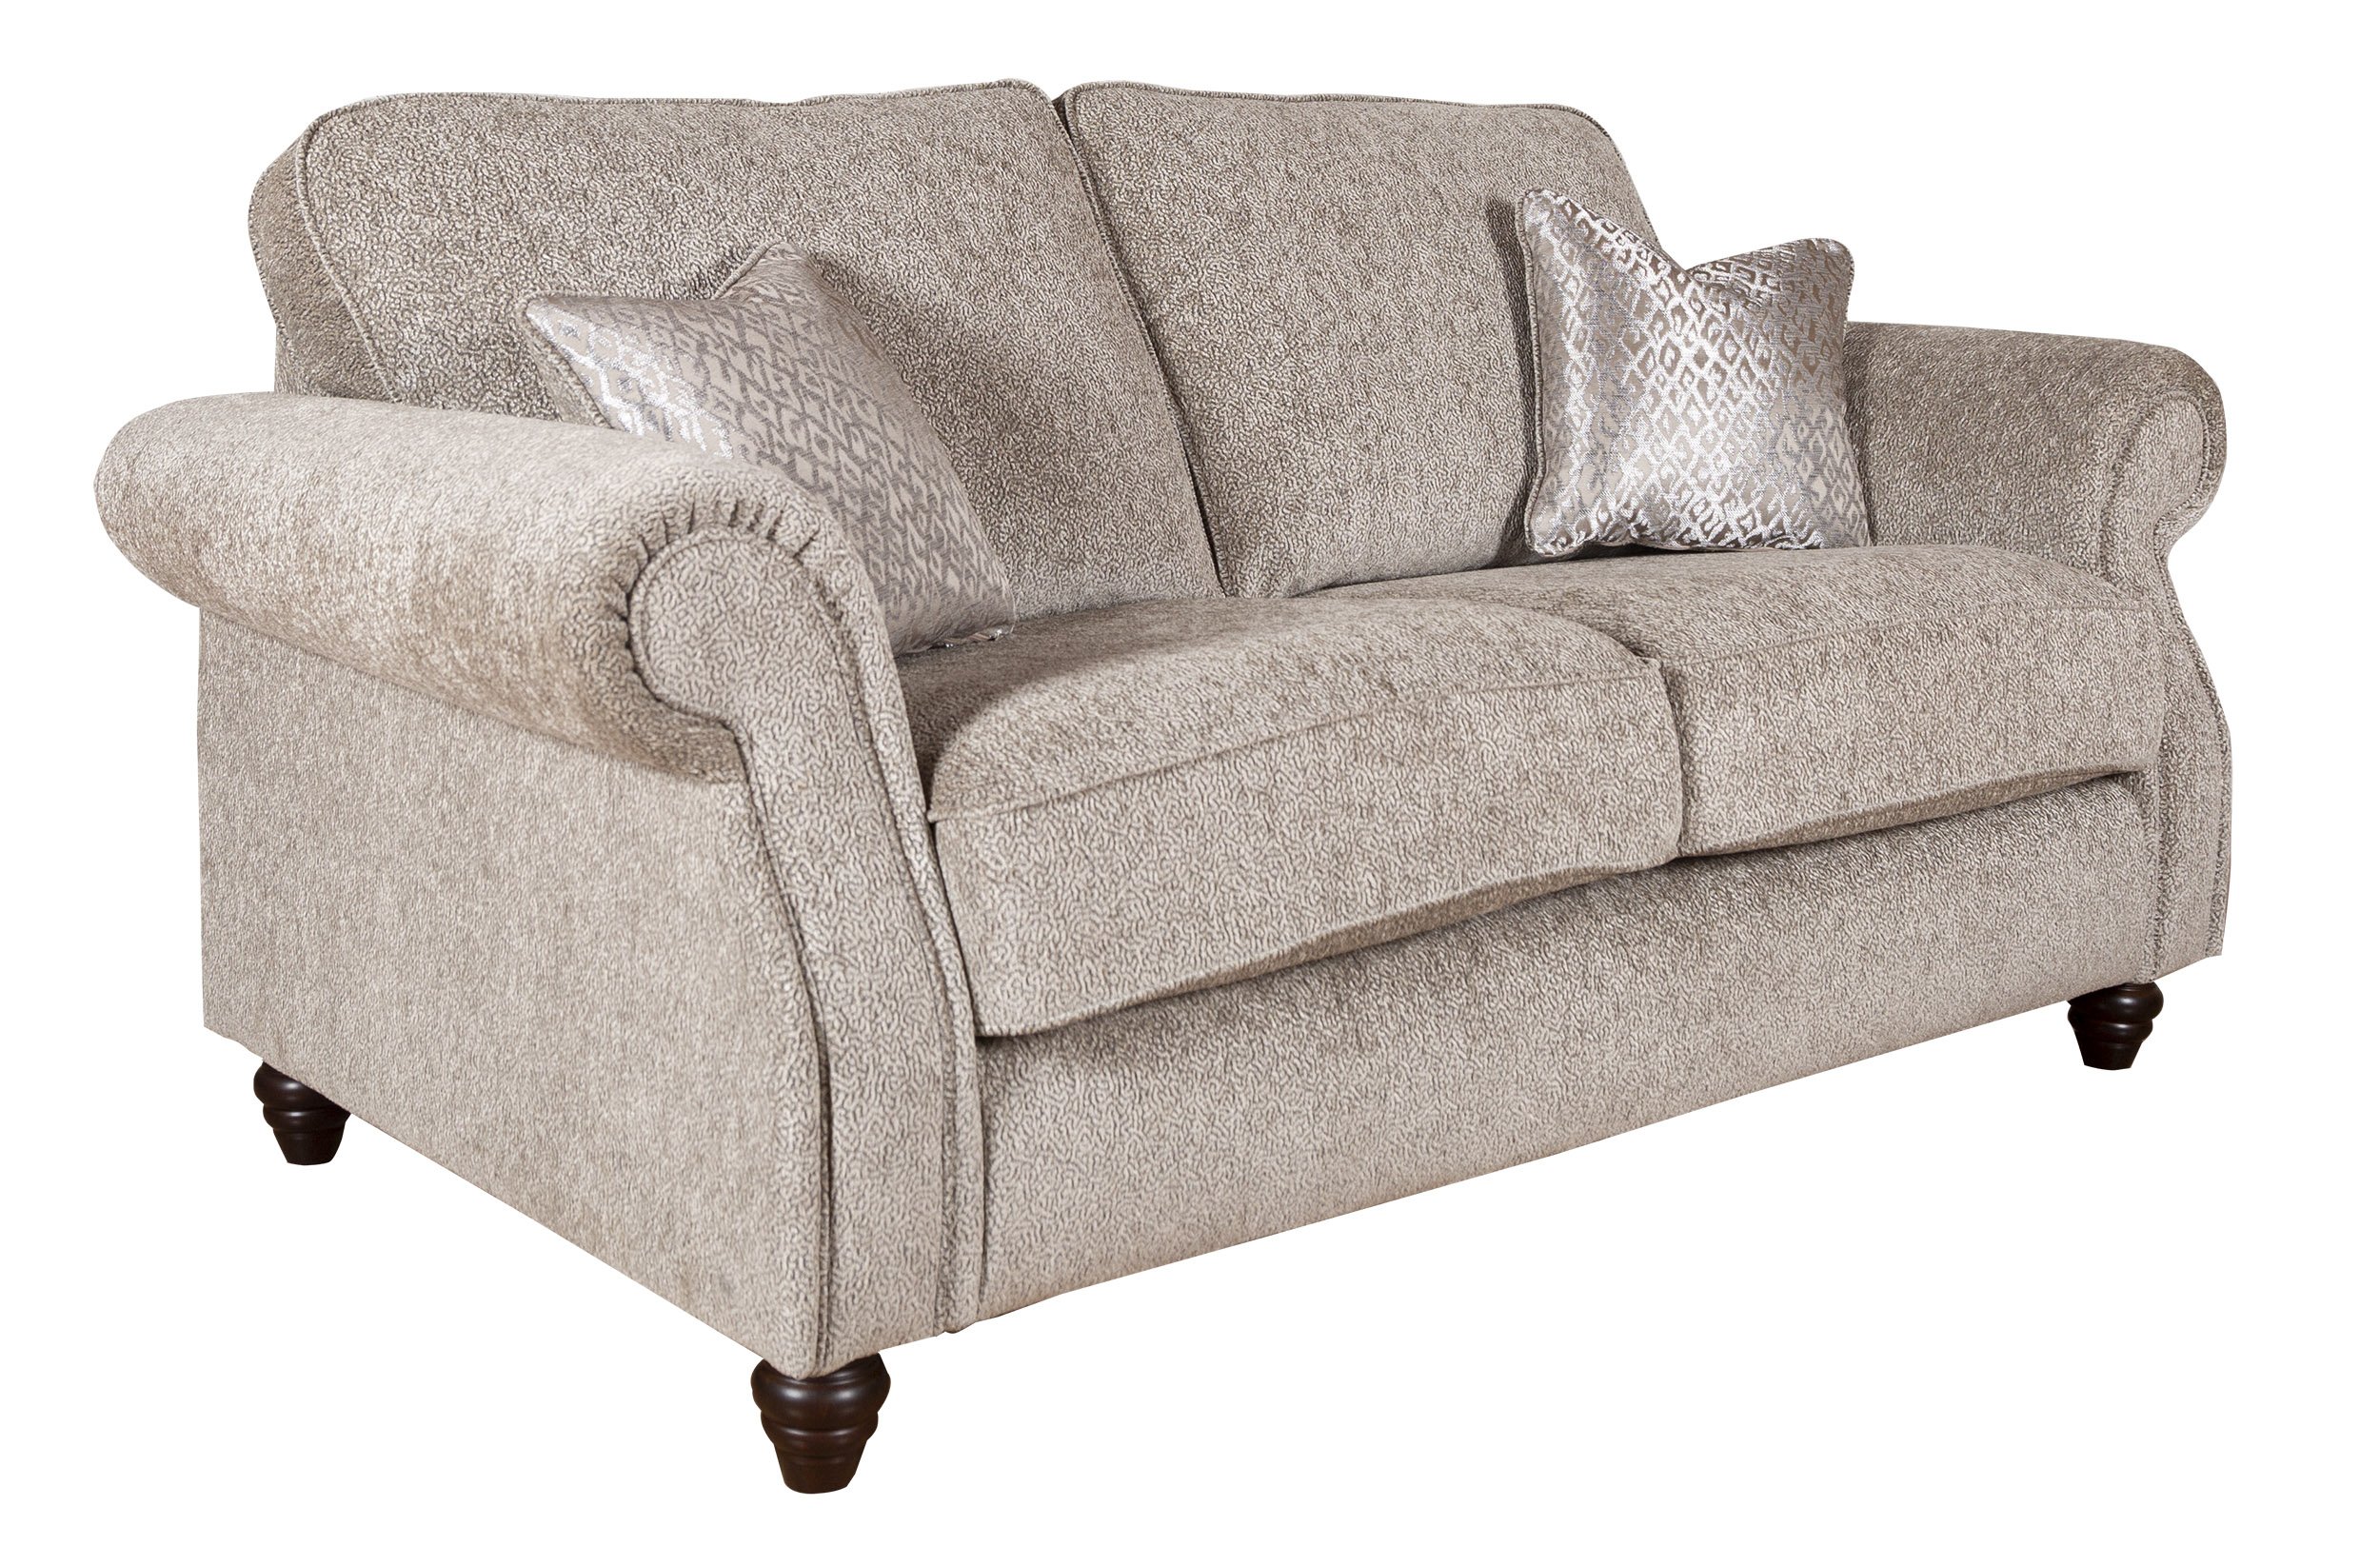 Finley special - 3 seater - Angled - romance diamond silver.jpg